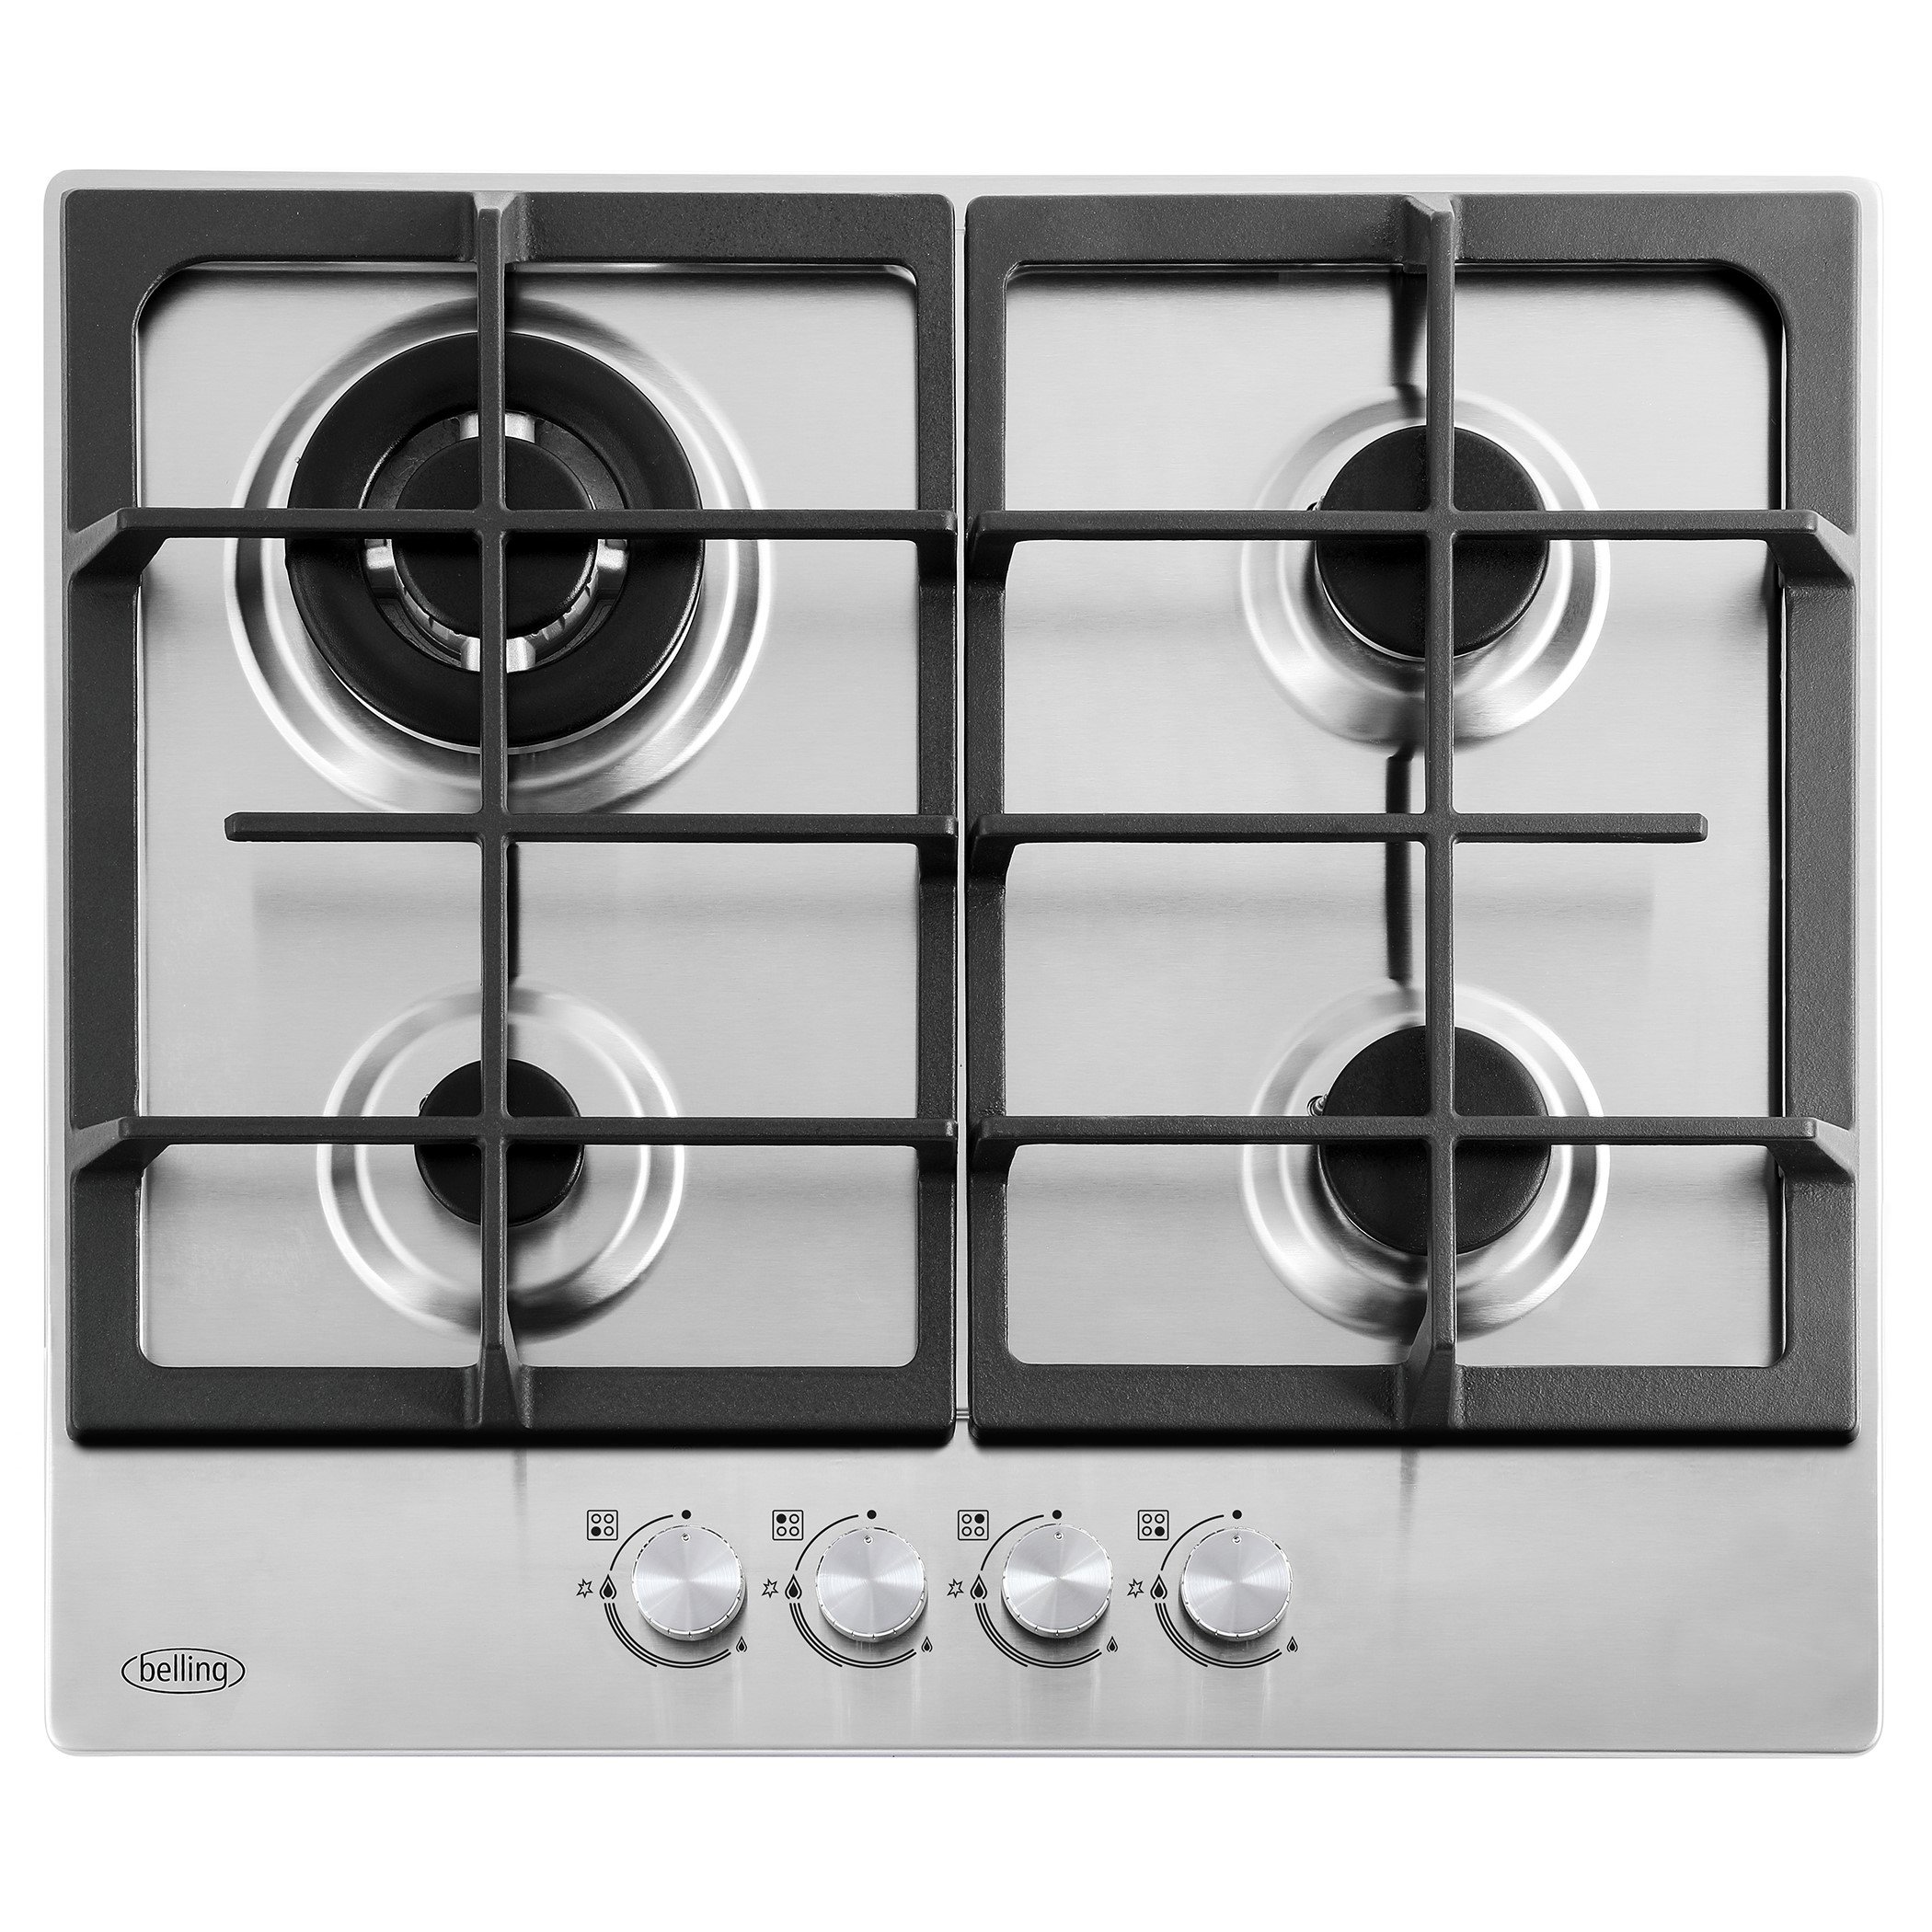 60cm stainless steel gas hob with powerful 3.6kW wok burner and cast iron pan supports